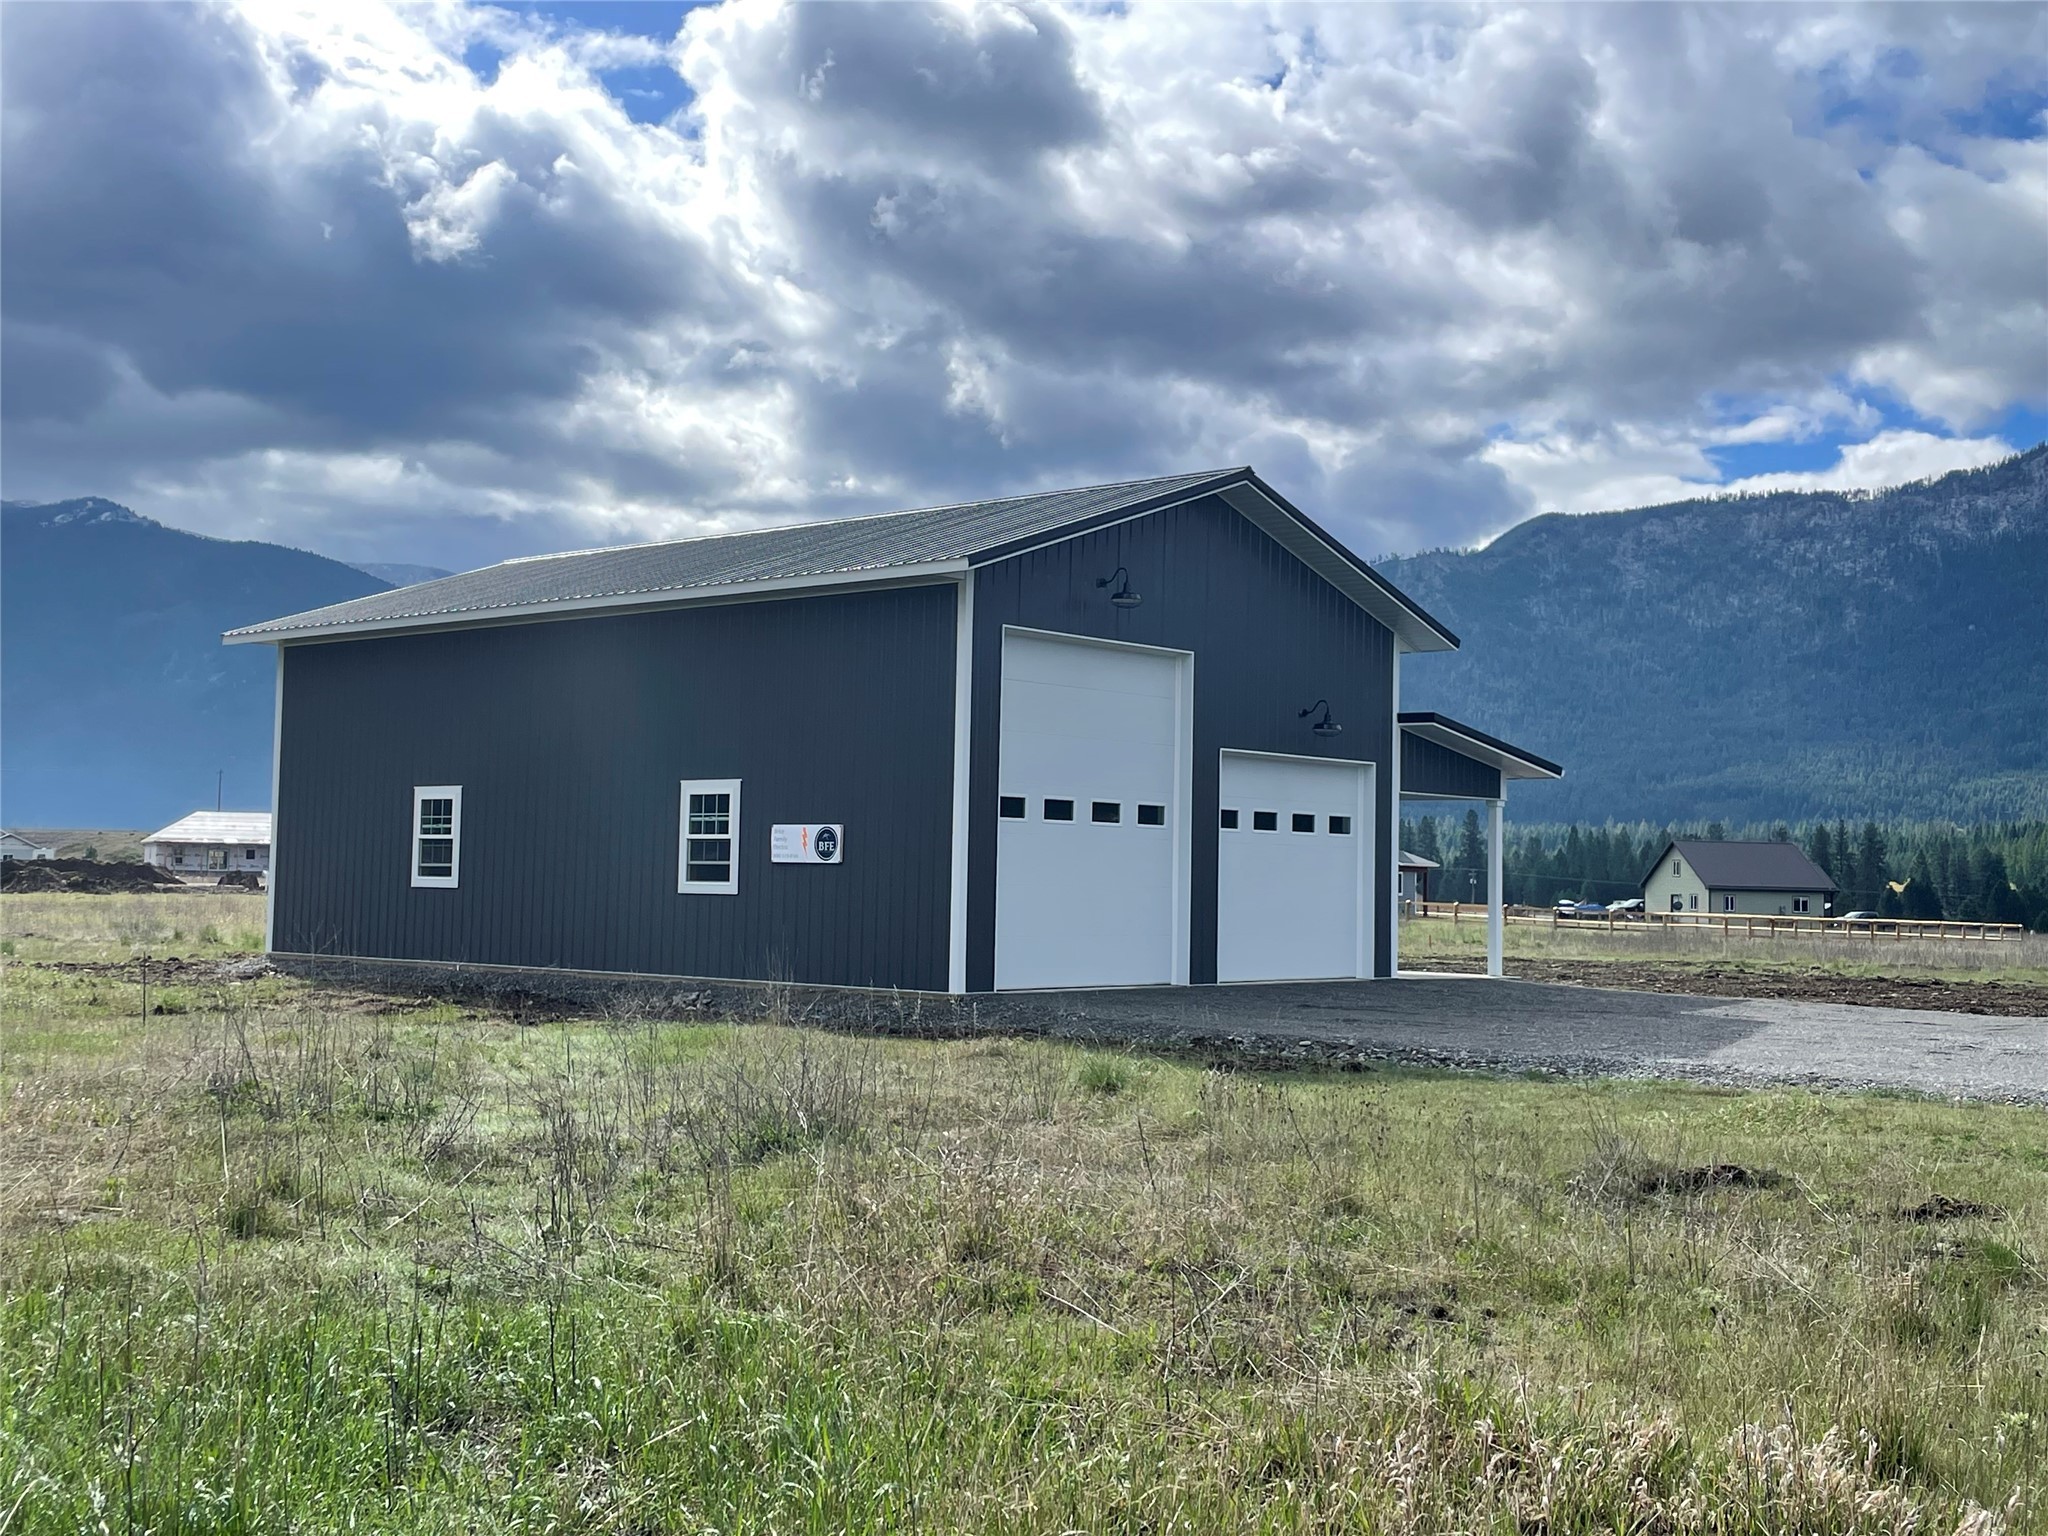 Brand new beautiful shop on .75 acres with water, power and septic installed!  This quality building includes shop space, 30'x48' with 16' ceilings and a 10'x48' lean-to with concrete floor and partially enclosed with bathroom area plumbed in.  Building includes 2 overhead doors with openers, 12'x14' and 12'x10'.  Ceiling is finished with metal, with insulation blown in.  This quality shop was built to last, with posts bracketed unto concrete, not set in the ground.  Septic is permitted as a 4 bedroom, ready for a new home, if you choose.  Property is also ready for RV use, with a full RV hookup and gravel pad.  So many possibilities with this property! Property also has access to Salish Shores private boat launch.